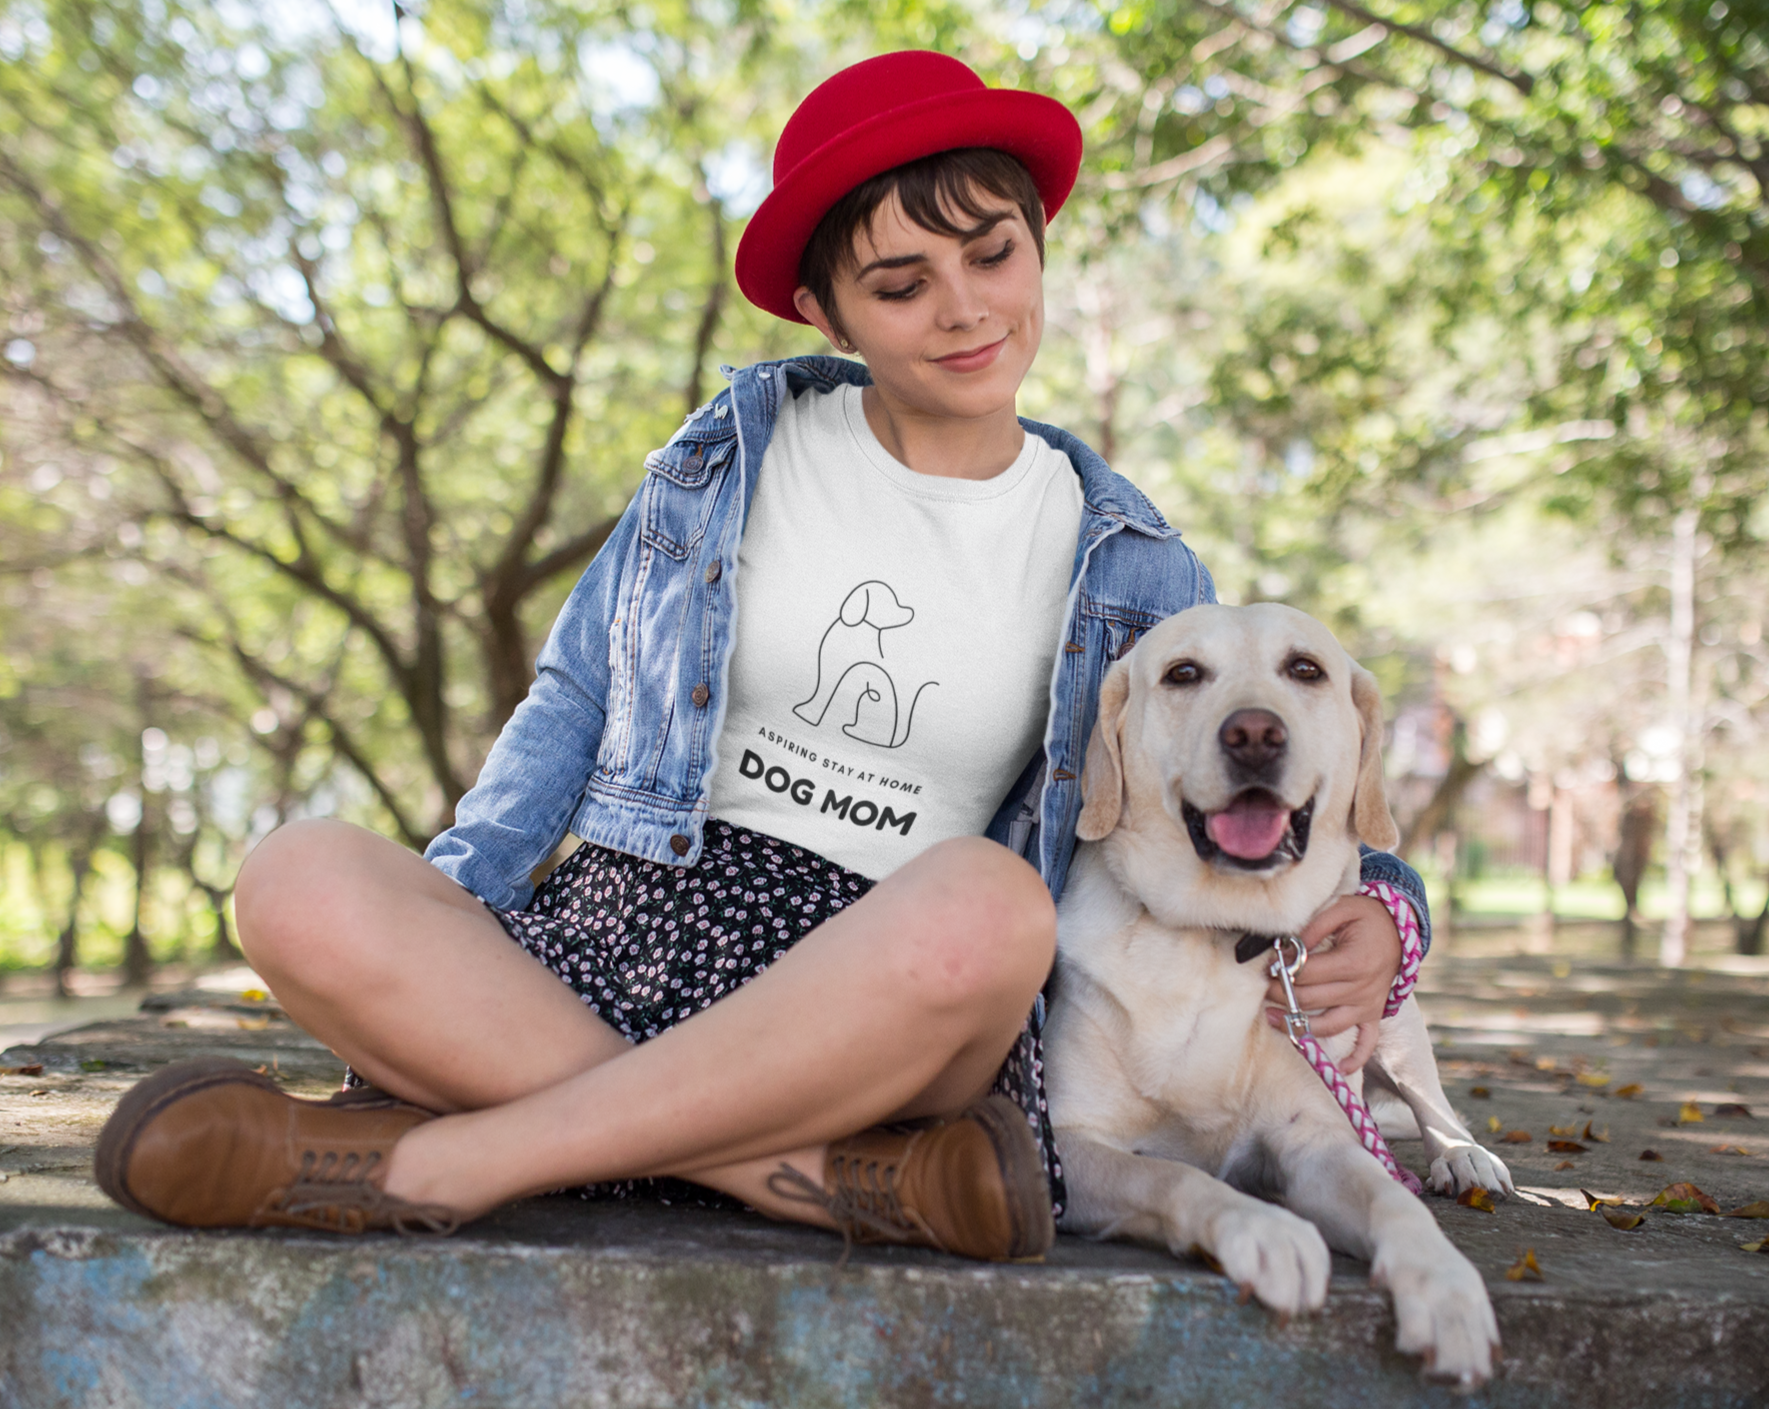 When your only aspiration in life is to make sure your dog has the best life possible.  This funny Aspiring Stay at Home Dog Mom cotton t-shirt is made with 100% cotton blend so it is super soft and comfortable. Perfect for walks or cuddling on the couch with your furry friend, this will be your new favorite t-shirt guaranteed. 